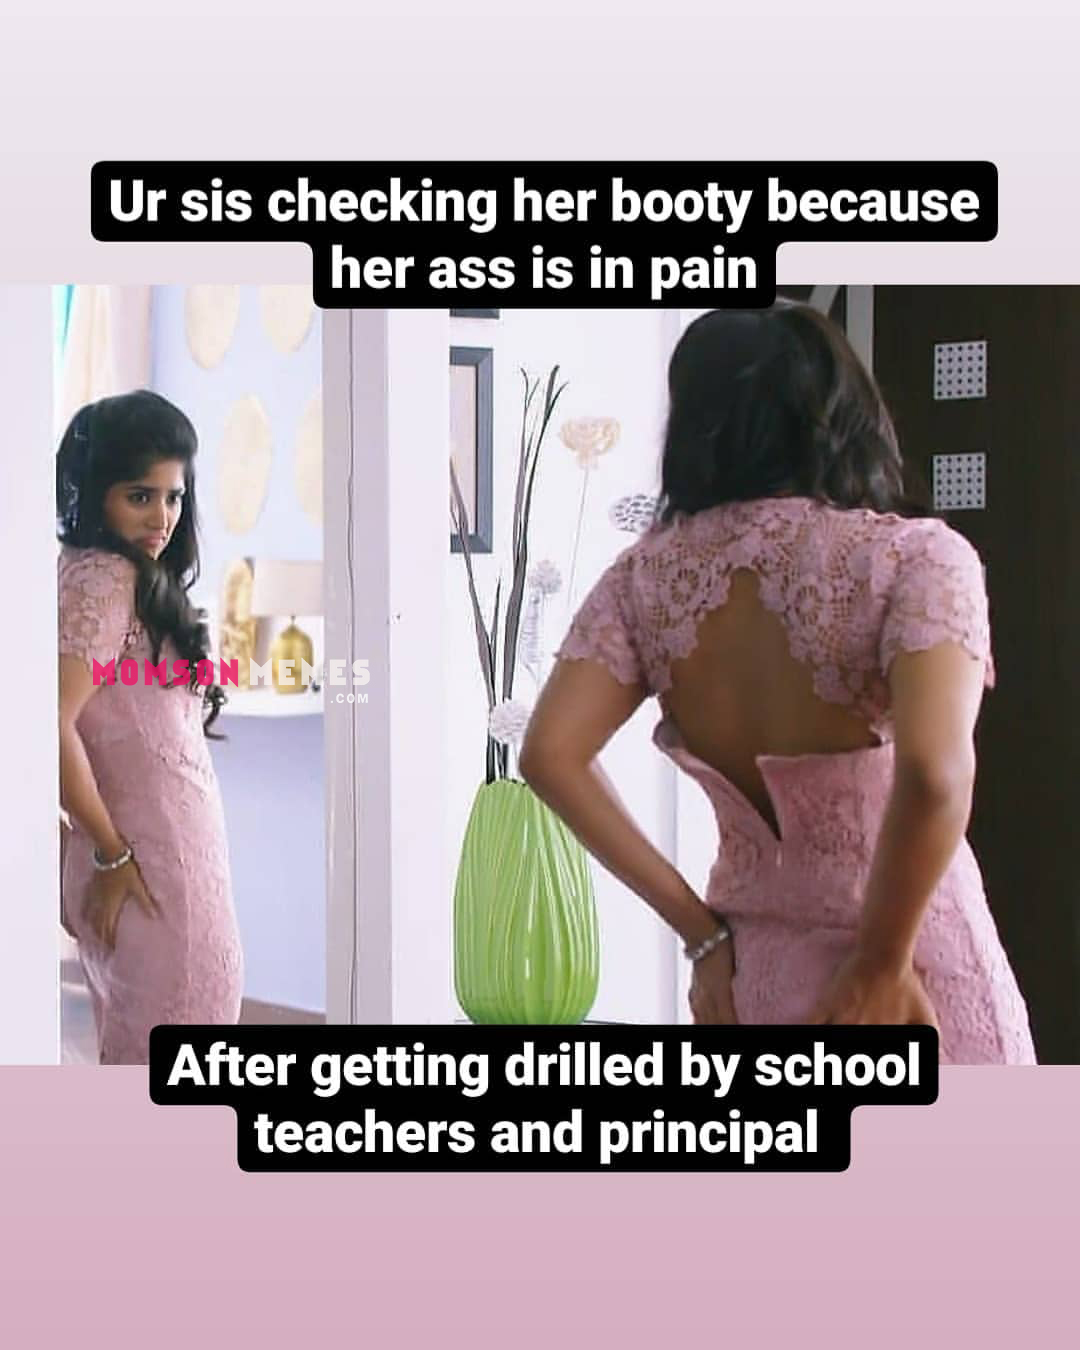 Sis after getting drilled by school teachers and principal!